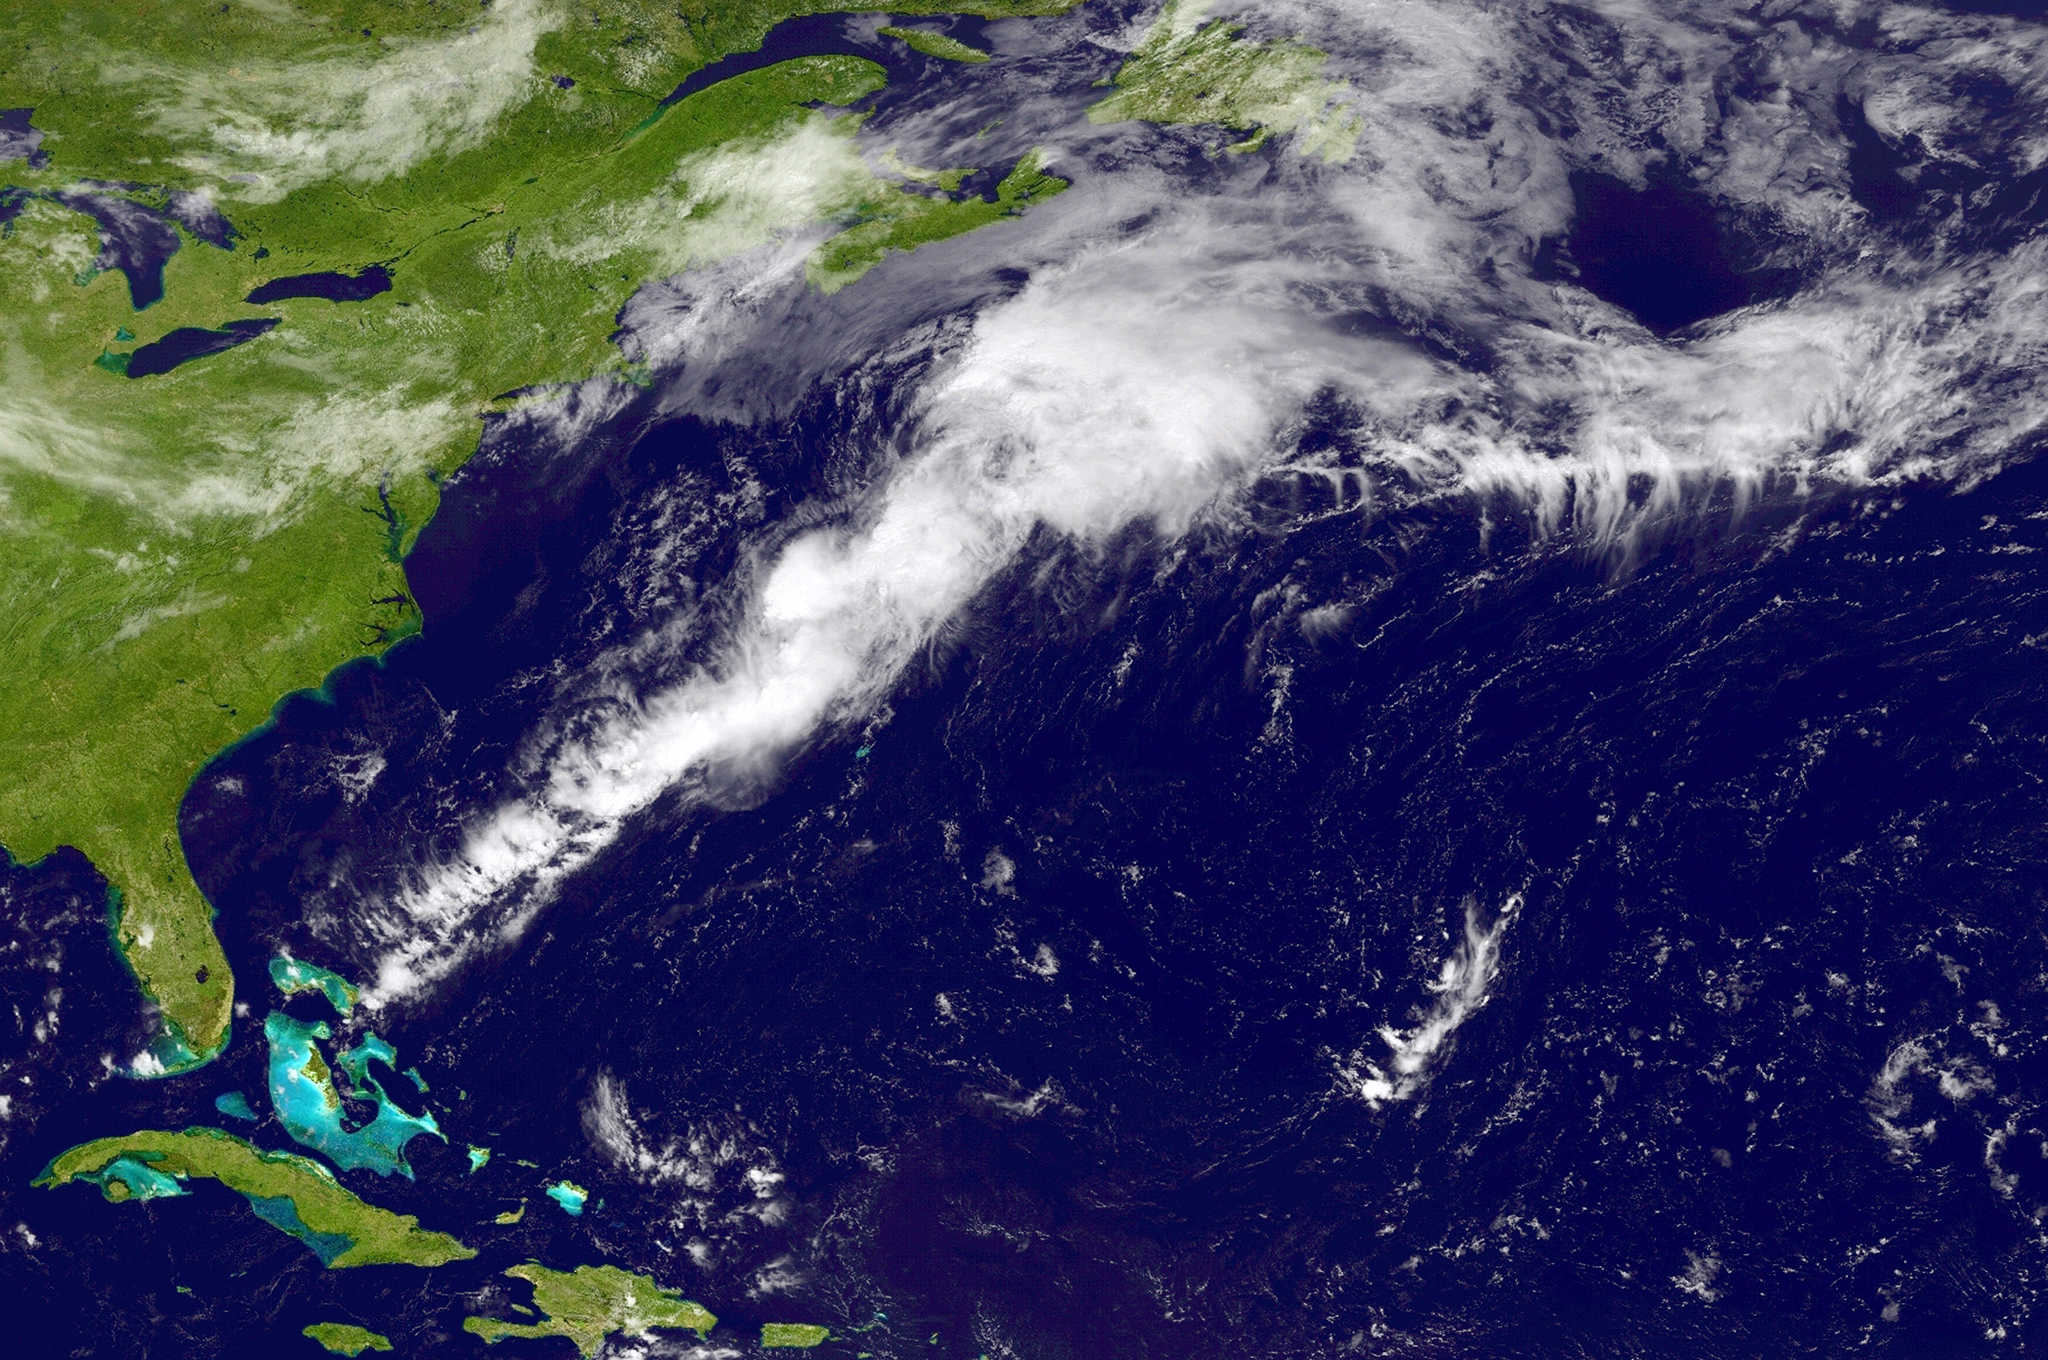 A weather system travels north and east in the Atlantic Ocean off the coast of the United States. The storm named Bertha, the second hurricane of the 2014 Atlantic hurricane season, is now expected to grow in size before becoming a post-tropical cyclone w